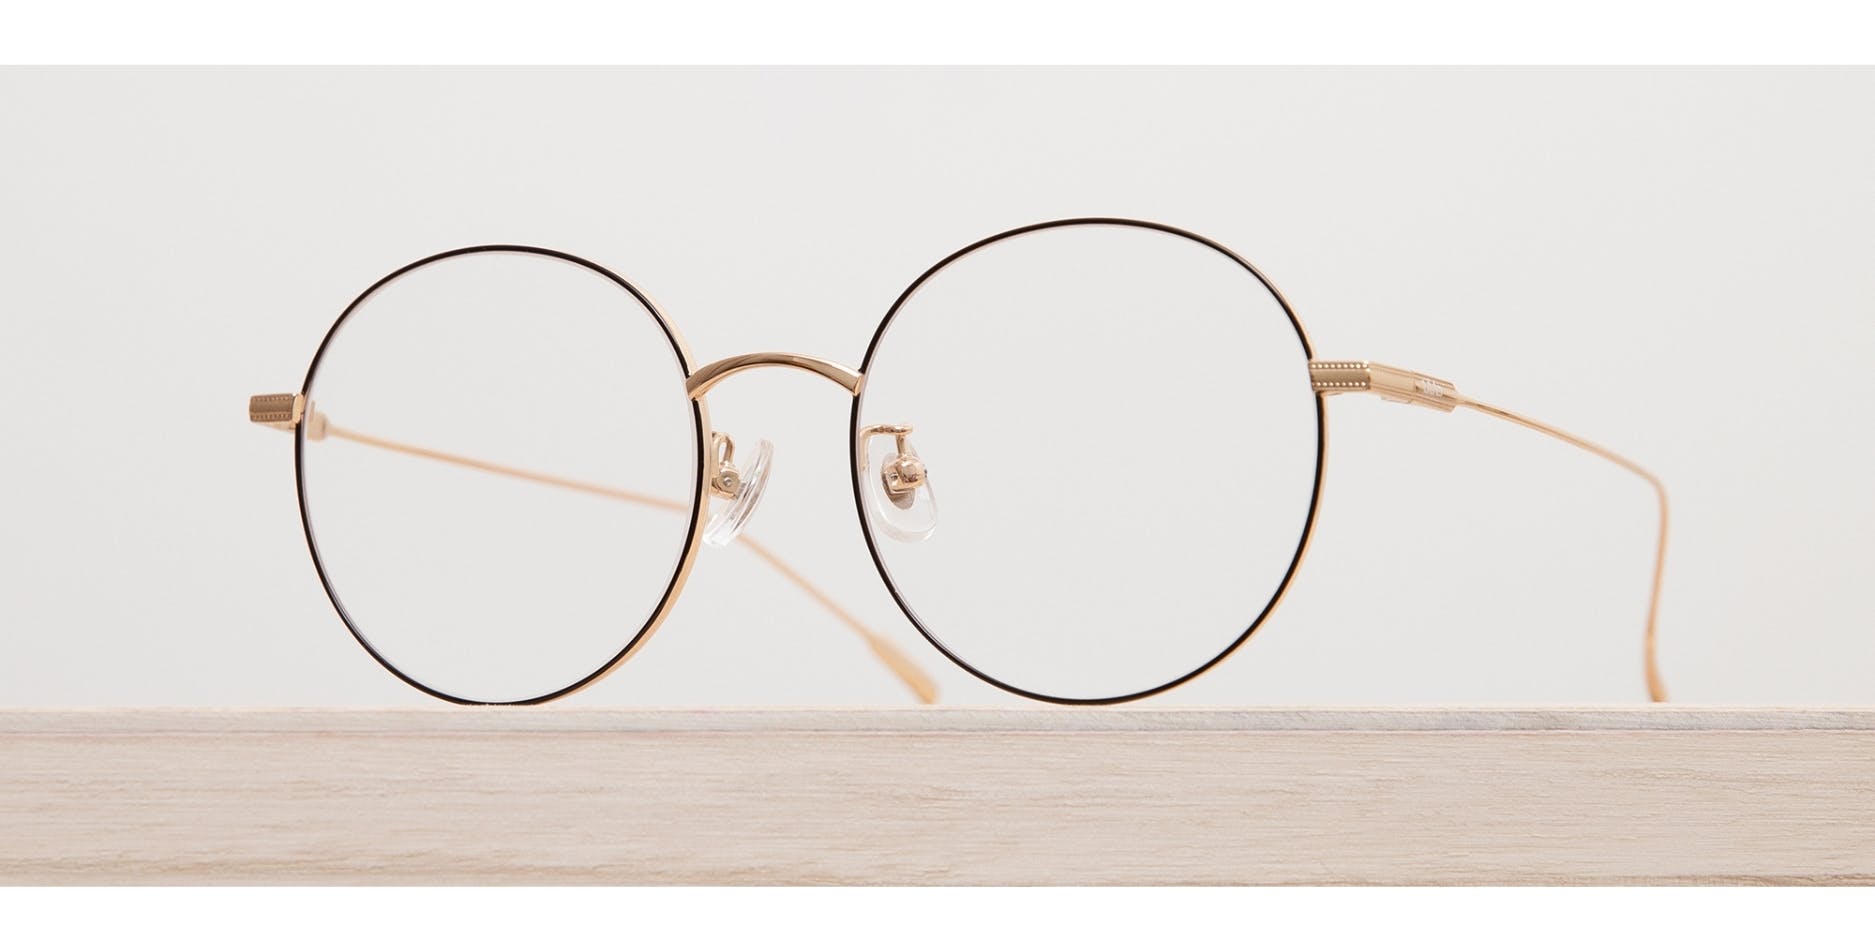 What strength reading glasses is right for you